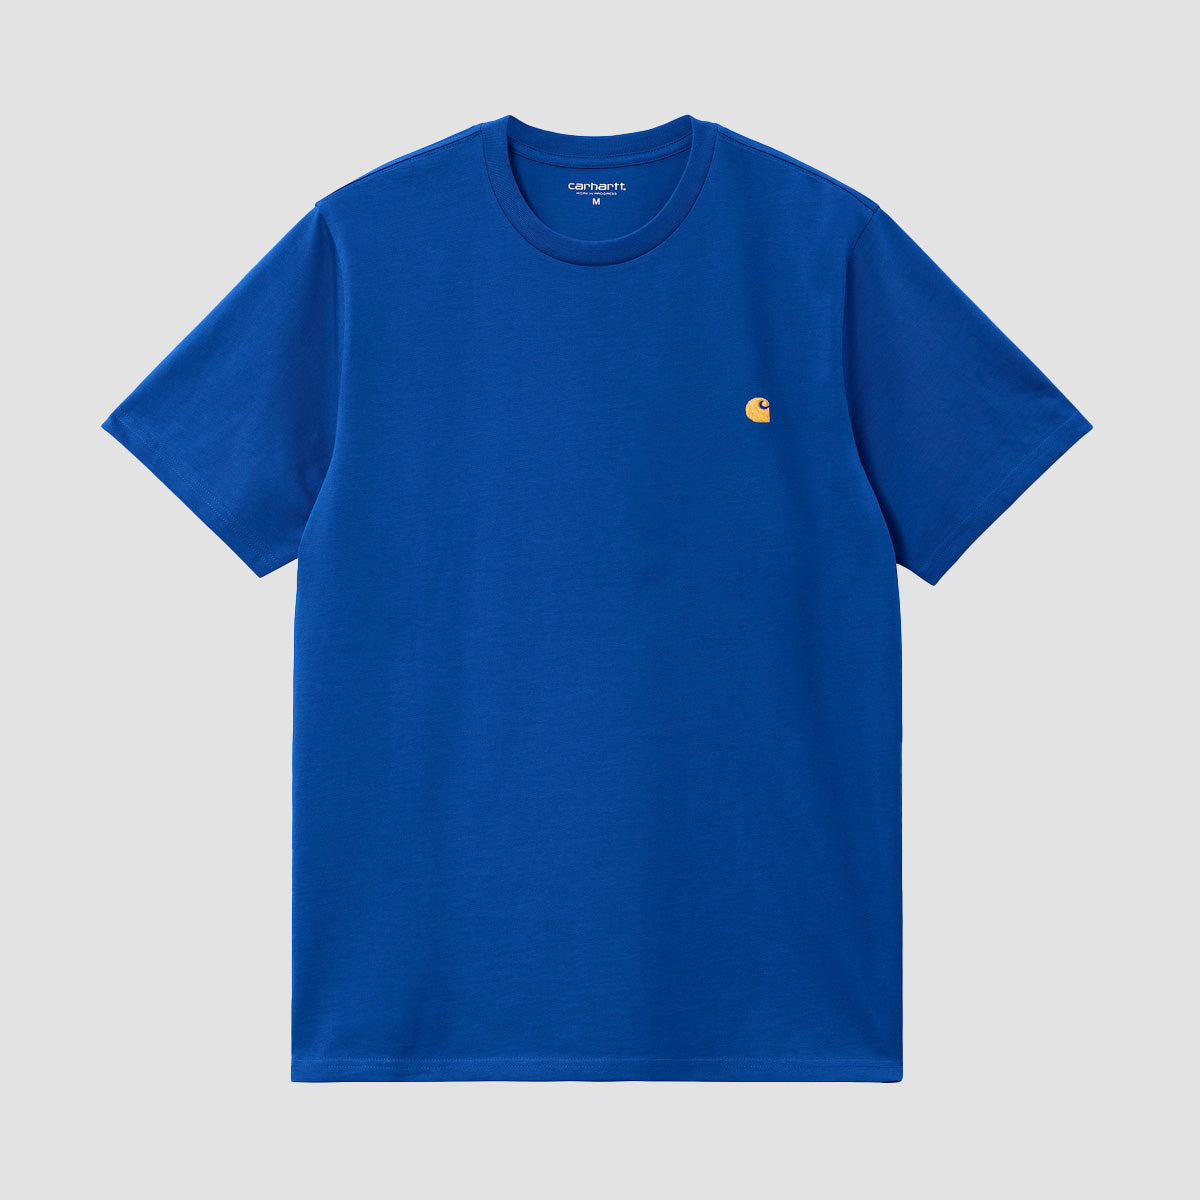 Carhartt WIP Chase T-Shirt Acapulco/Gold